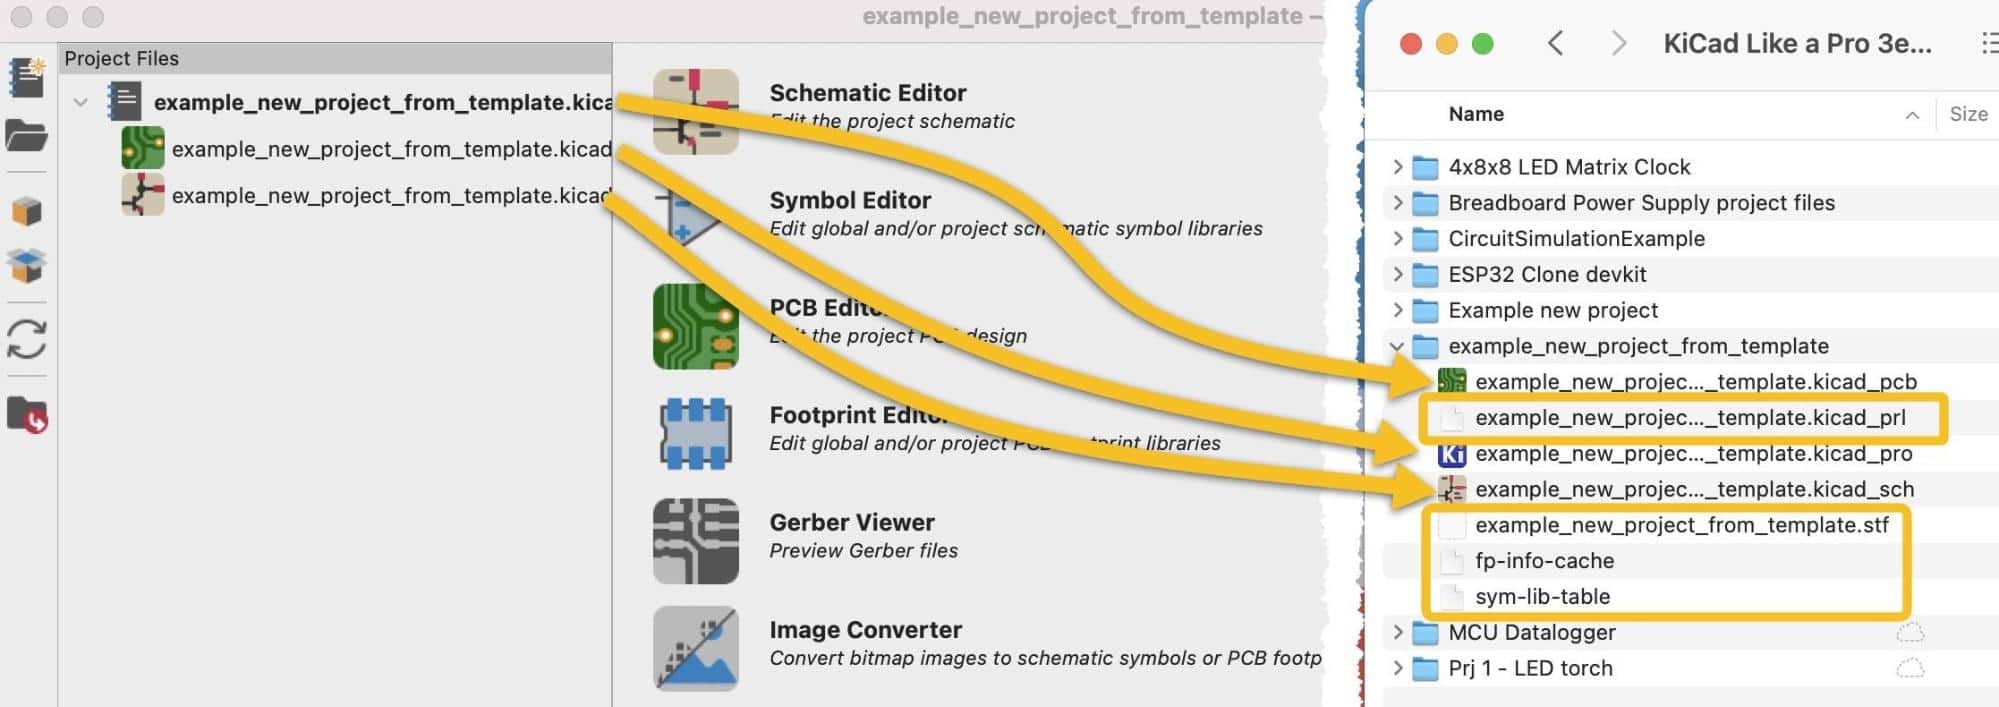 Figure 2.6.3: The new project created from a project template.